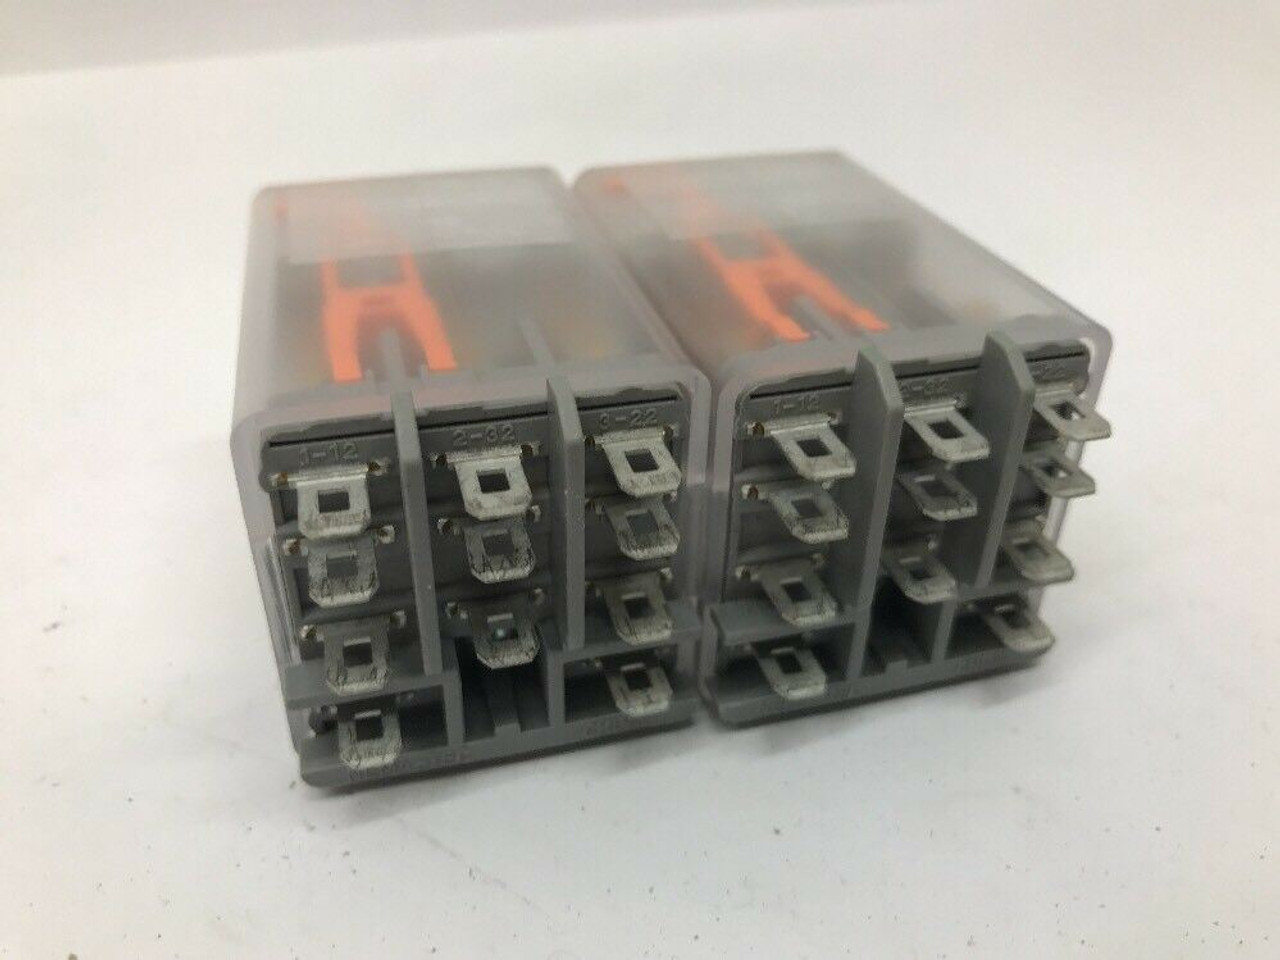 Electromagnetic Relay 85-33032-02 Schneider Electric Lot of 2